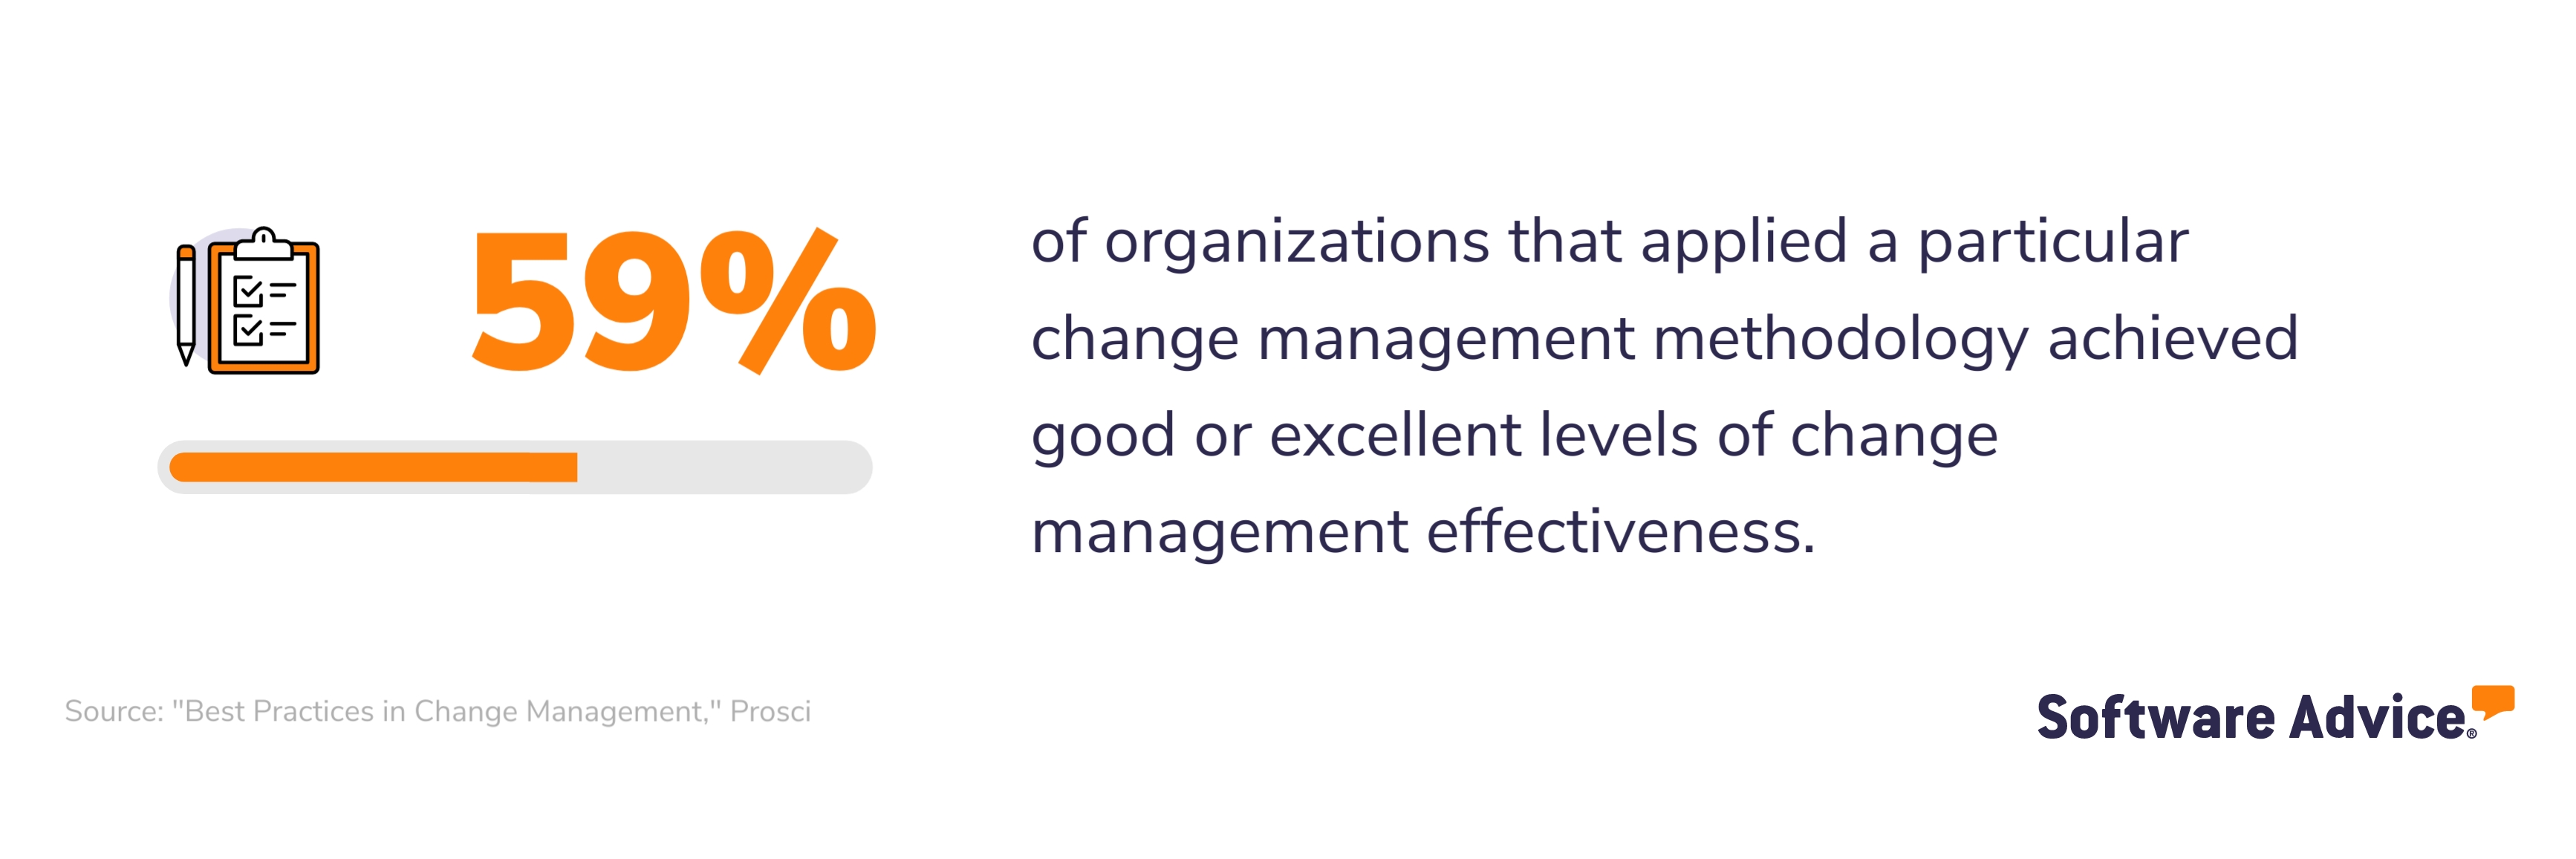 Prosci revealed that 59% of organizations that applied a particular change management methodology achieved good or excellent levels of change management effectiveness